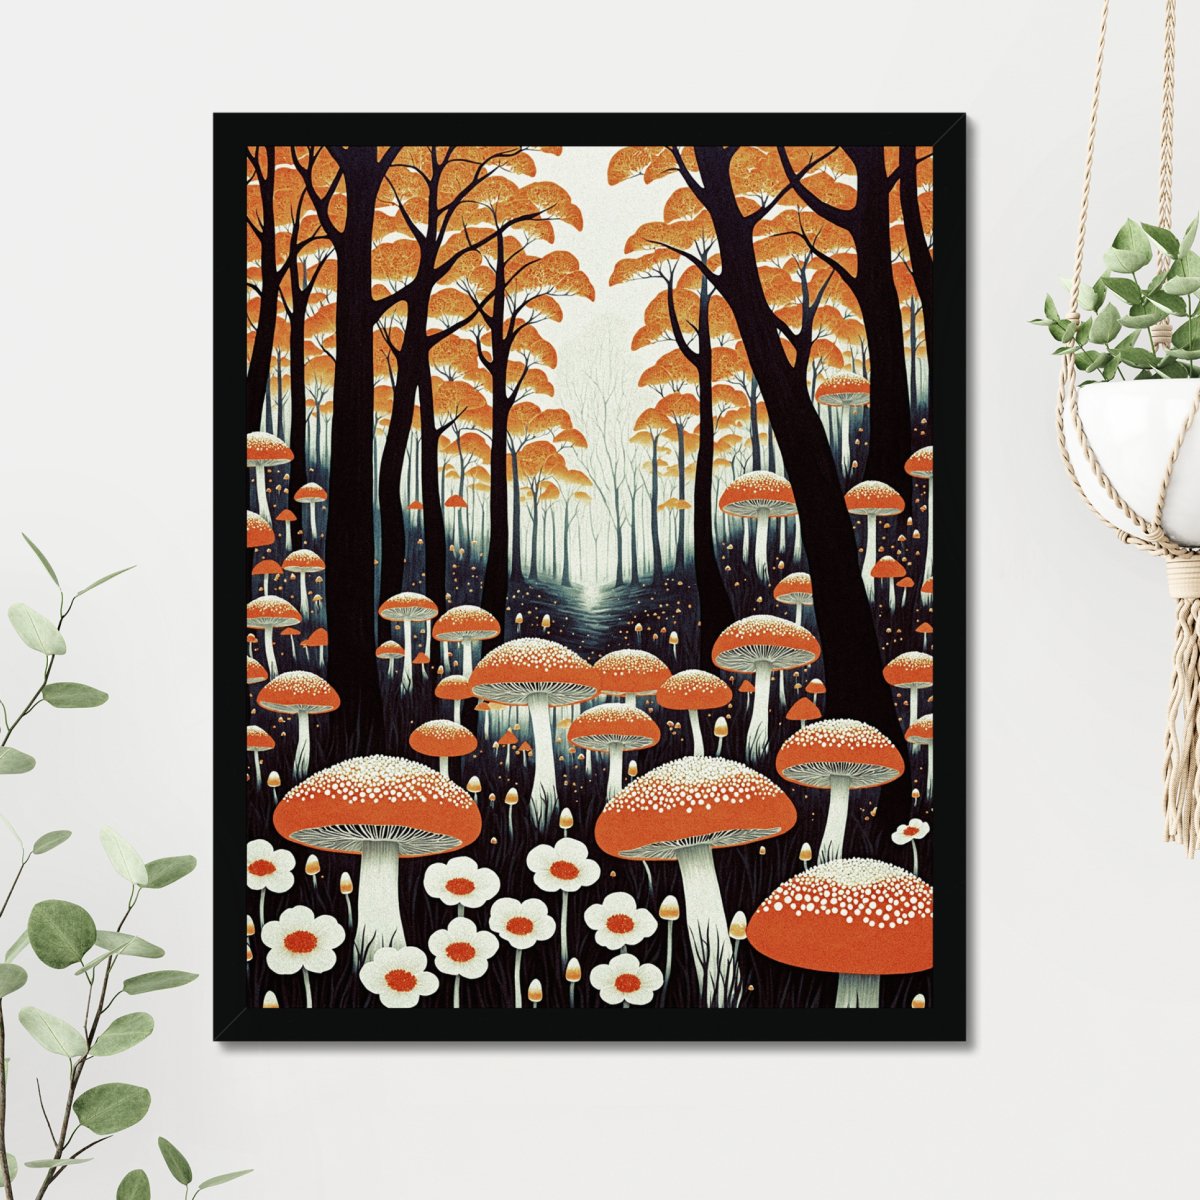 Terracotta grove - Art print - Poster - Ever colorful